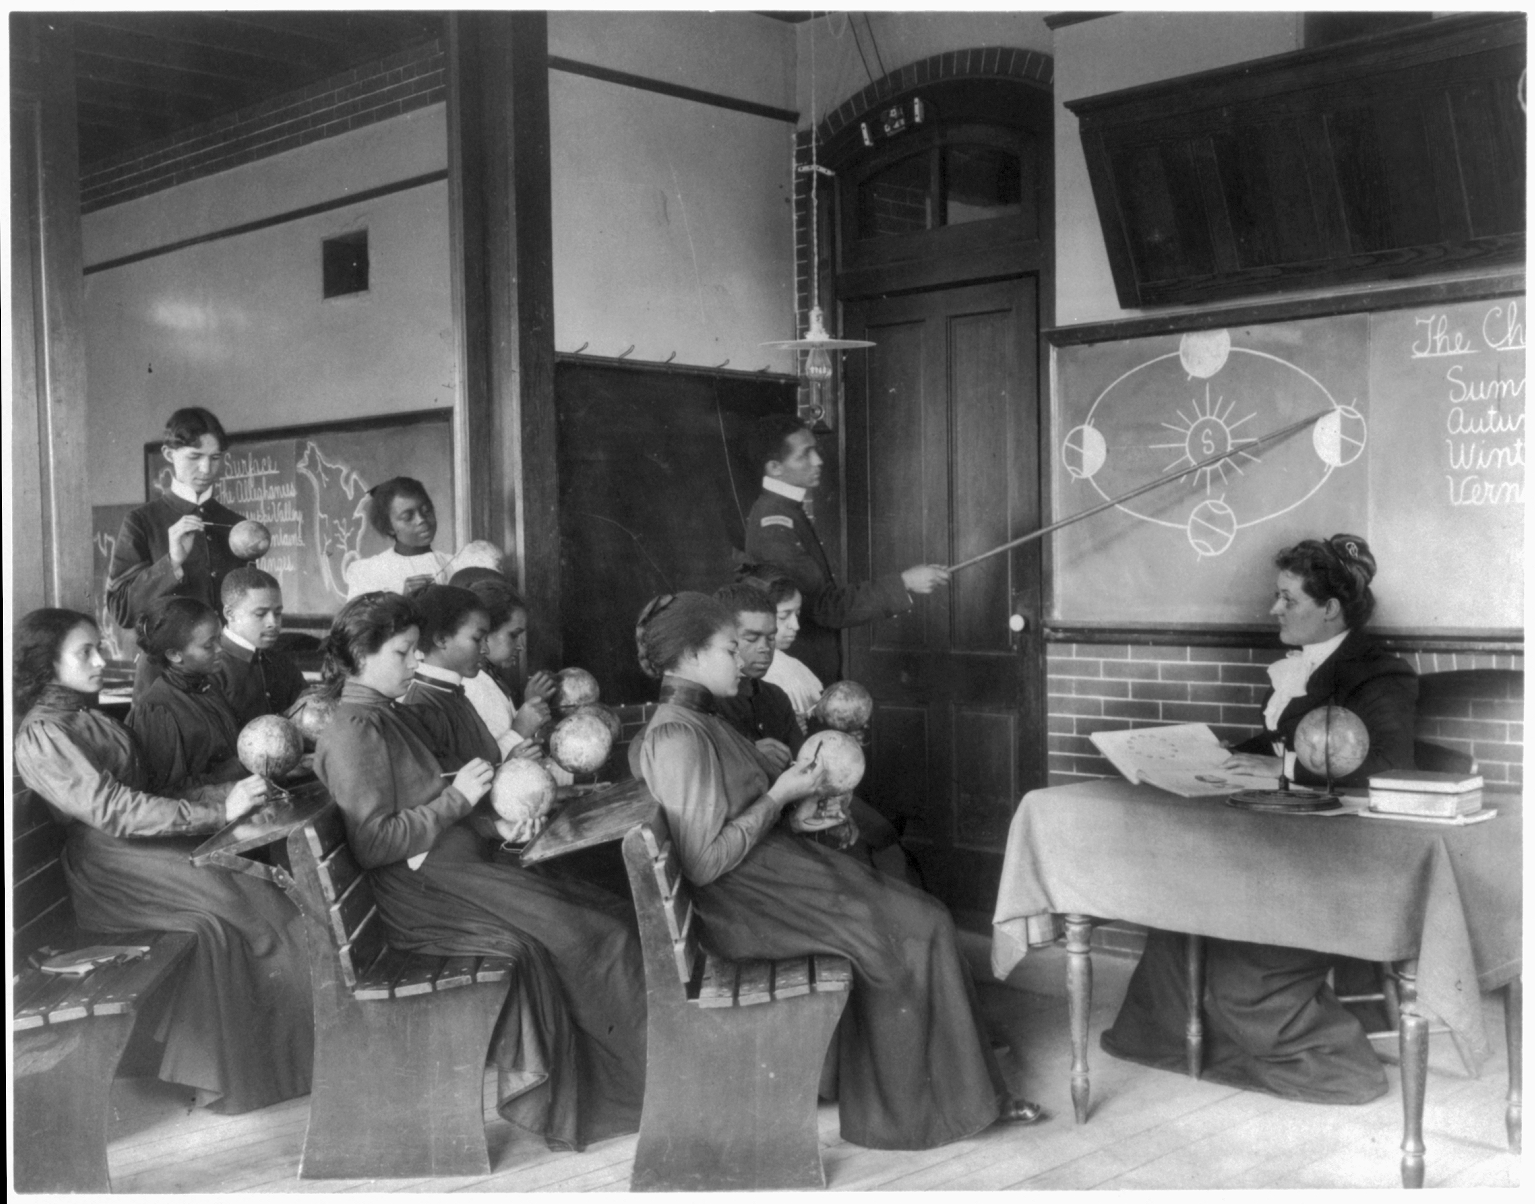 A black and white photo of school students holding small globes learning about the Earth's rotation around the Sun in 1899